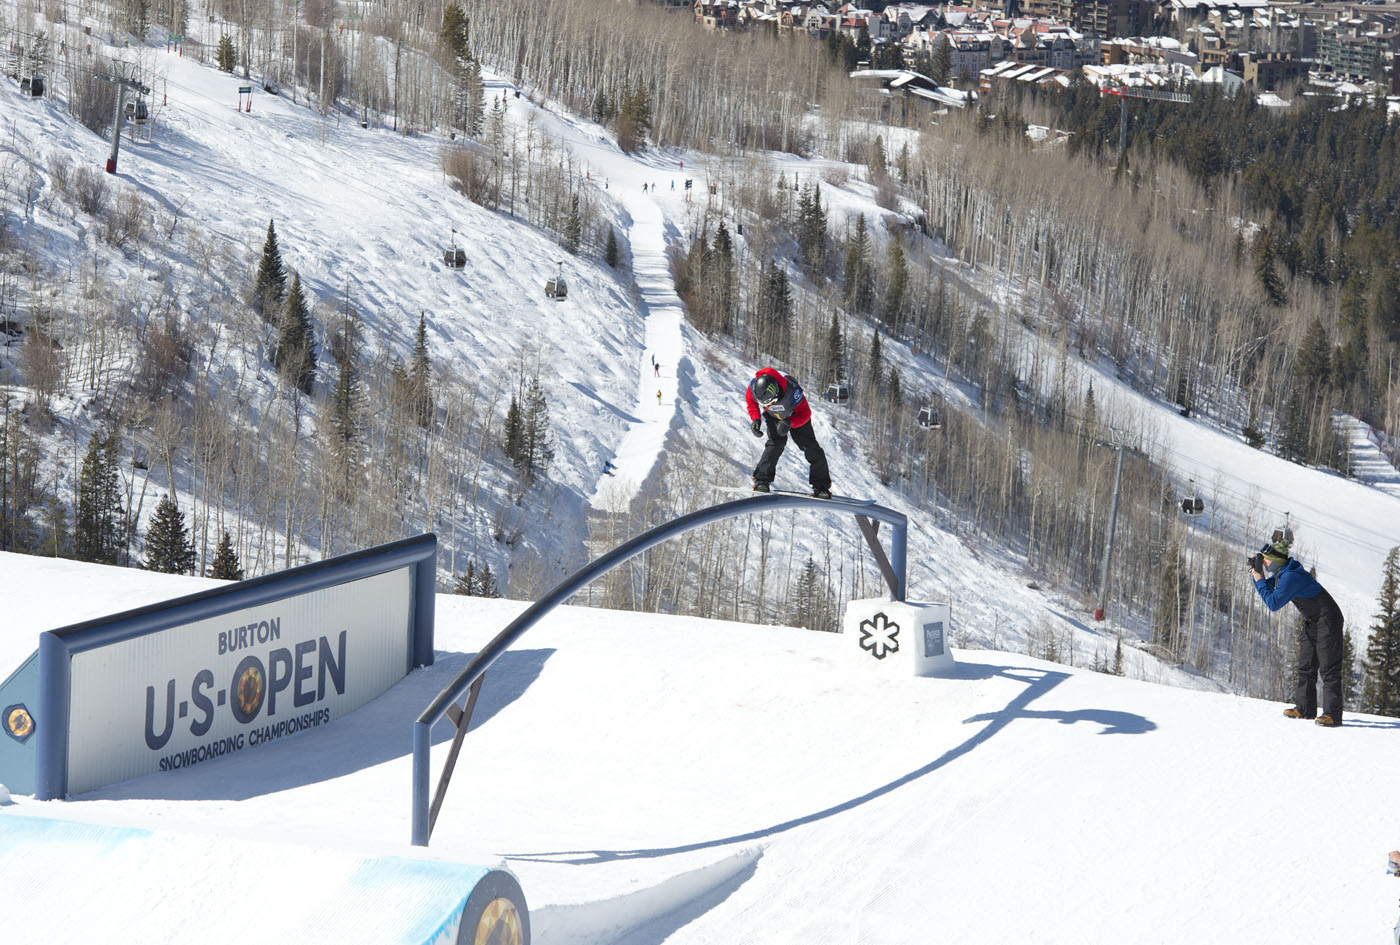 Monster Energy's Sven Thorgren Takes Third Place in Slopestyle at Burton US Open Snowboarding in Vail, CO